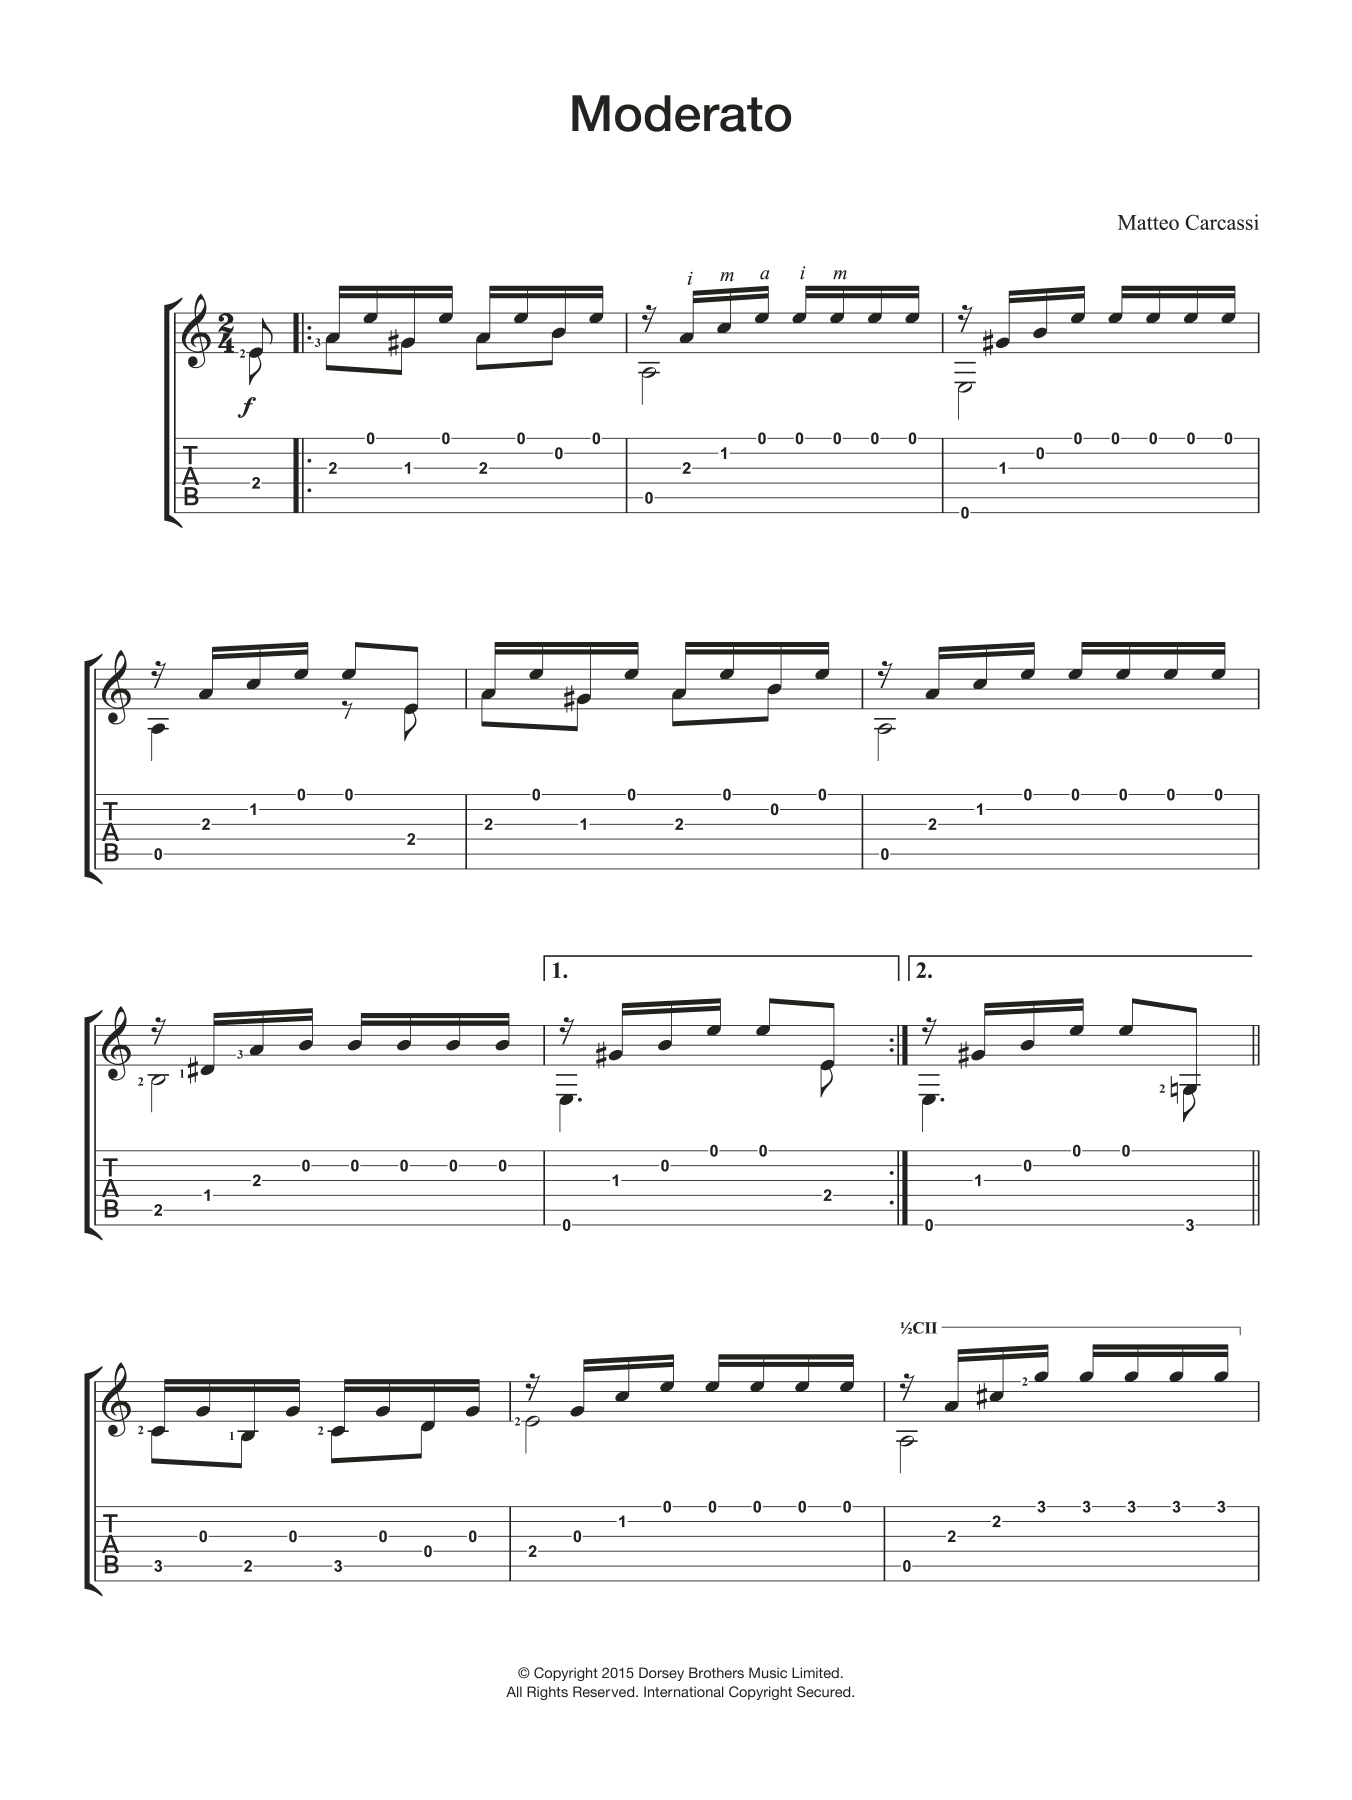 Matteo Carcassi Moderato sheet music preview music notes and score for Guitar including 2 page(s)